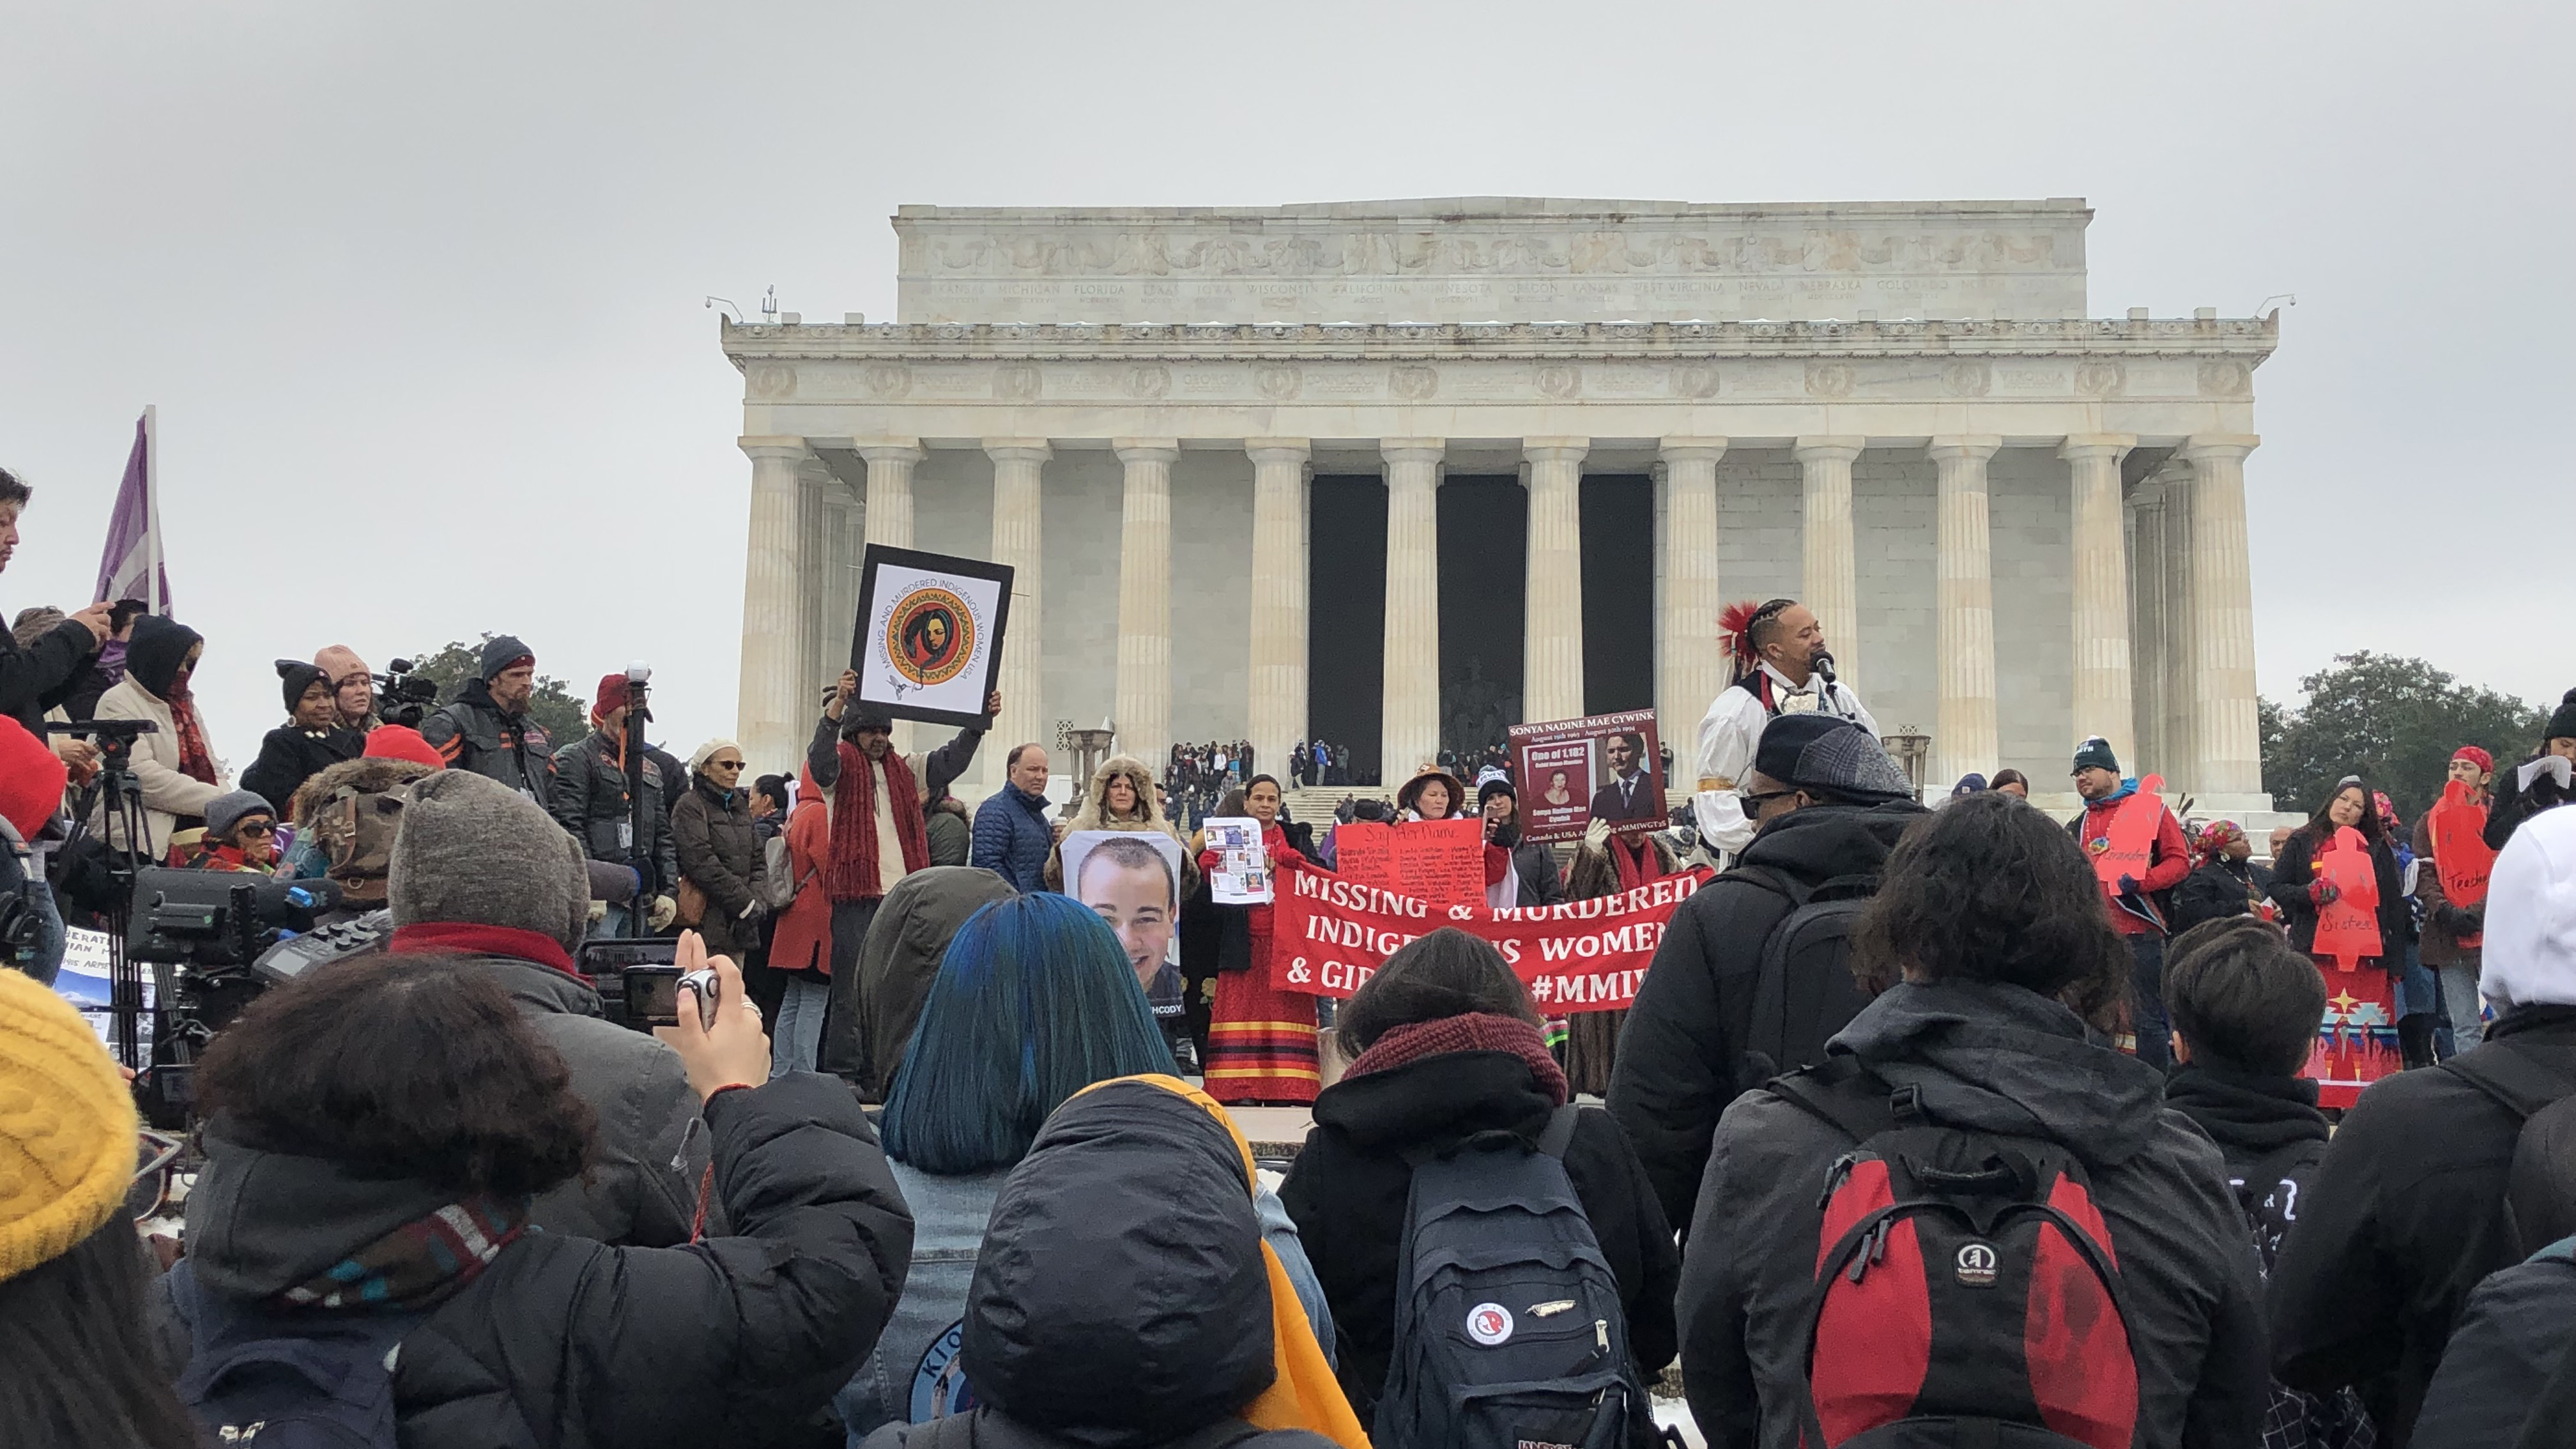 Everyone’s talking about that incident on the Lincoln Memorial — But here’s what the Indigenous People’s March actually wanted the public to know